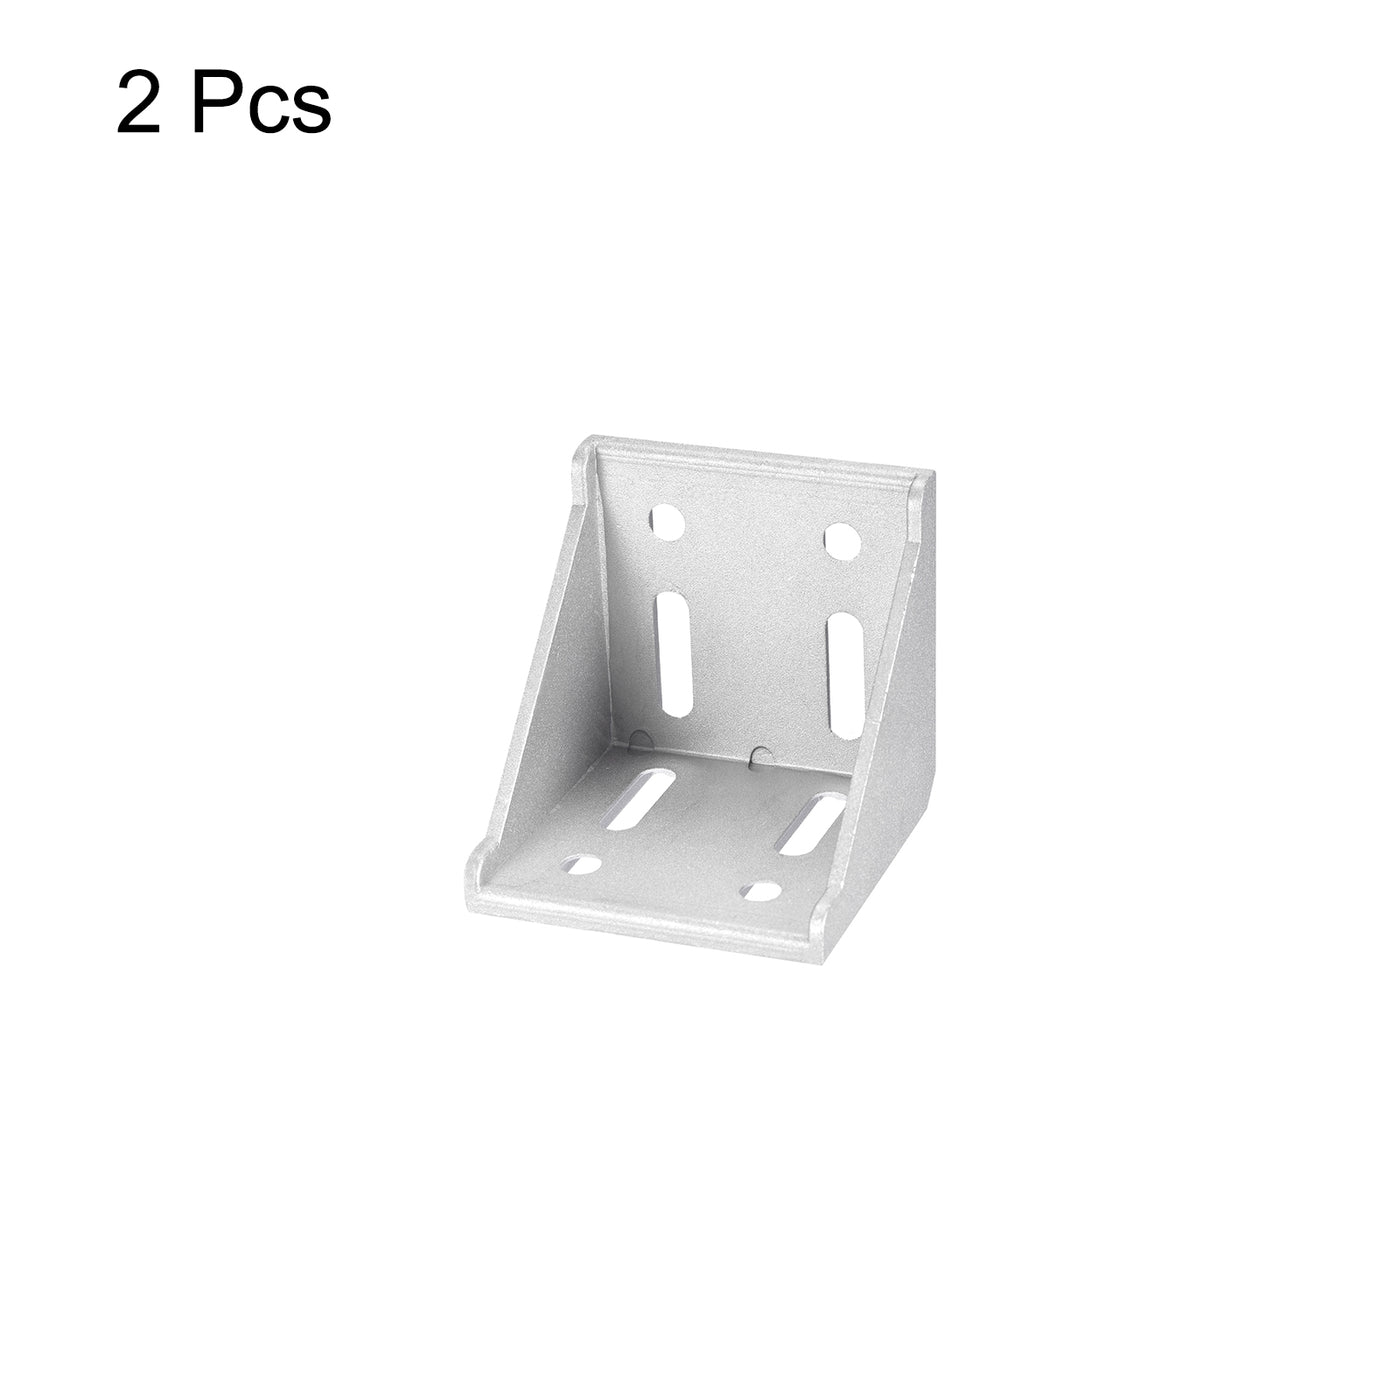 uxcell Uxcell 2Pcs Inside Corner Bracket Gusset, 78x78x79mm 8080 Angle Connectors for 4080/8080 Series Aluminum Extrusion Profile Silver